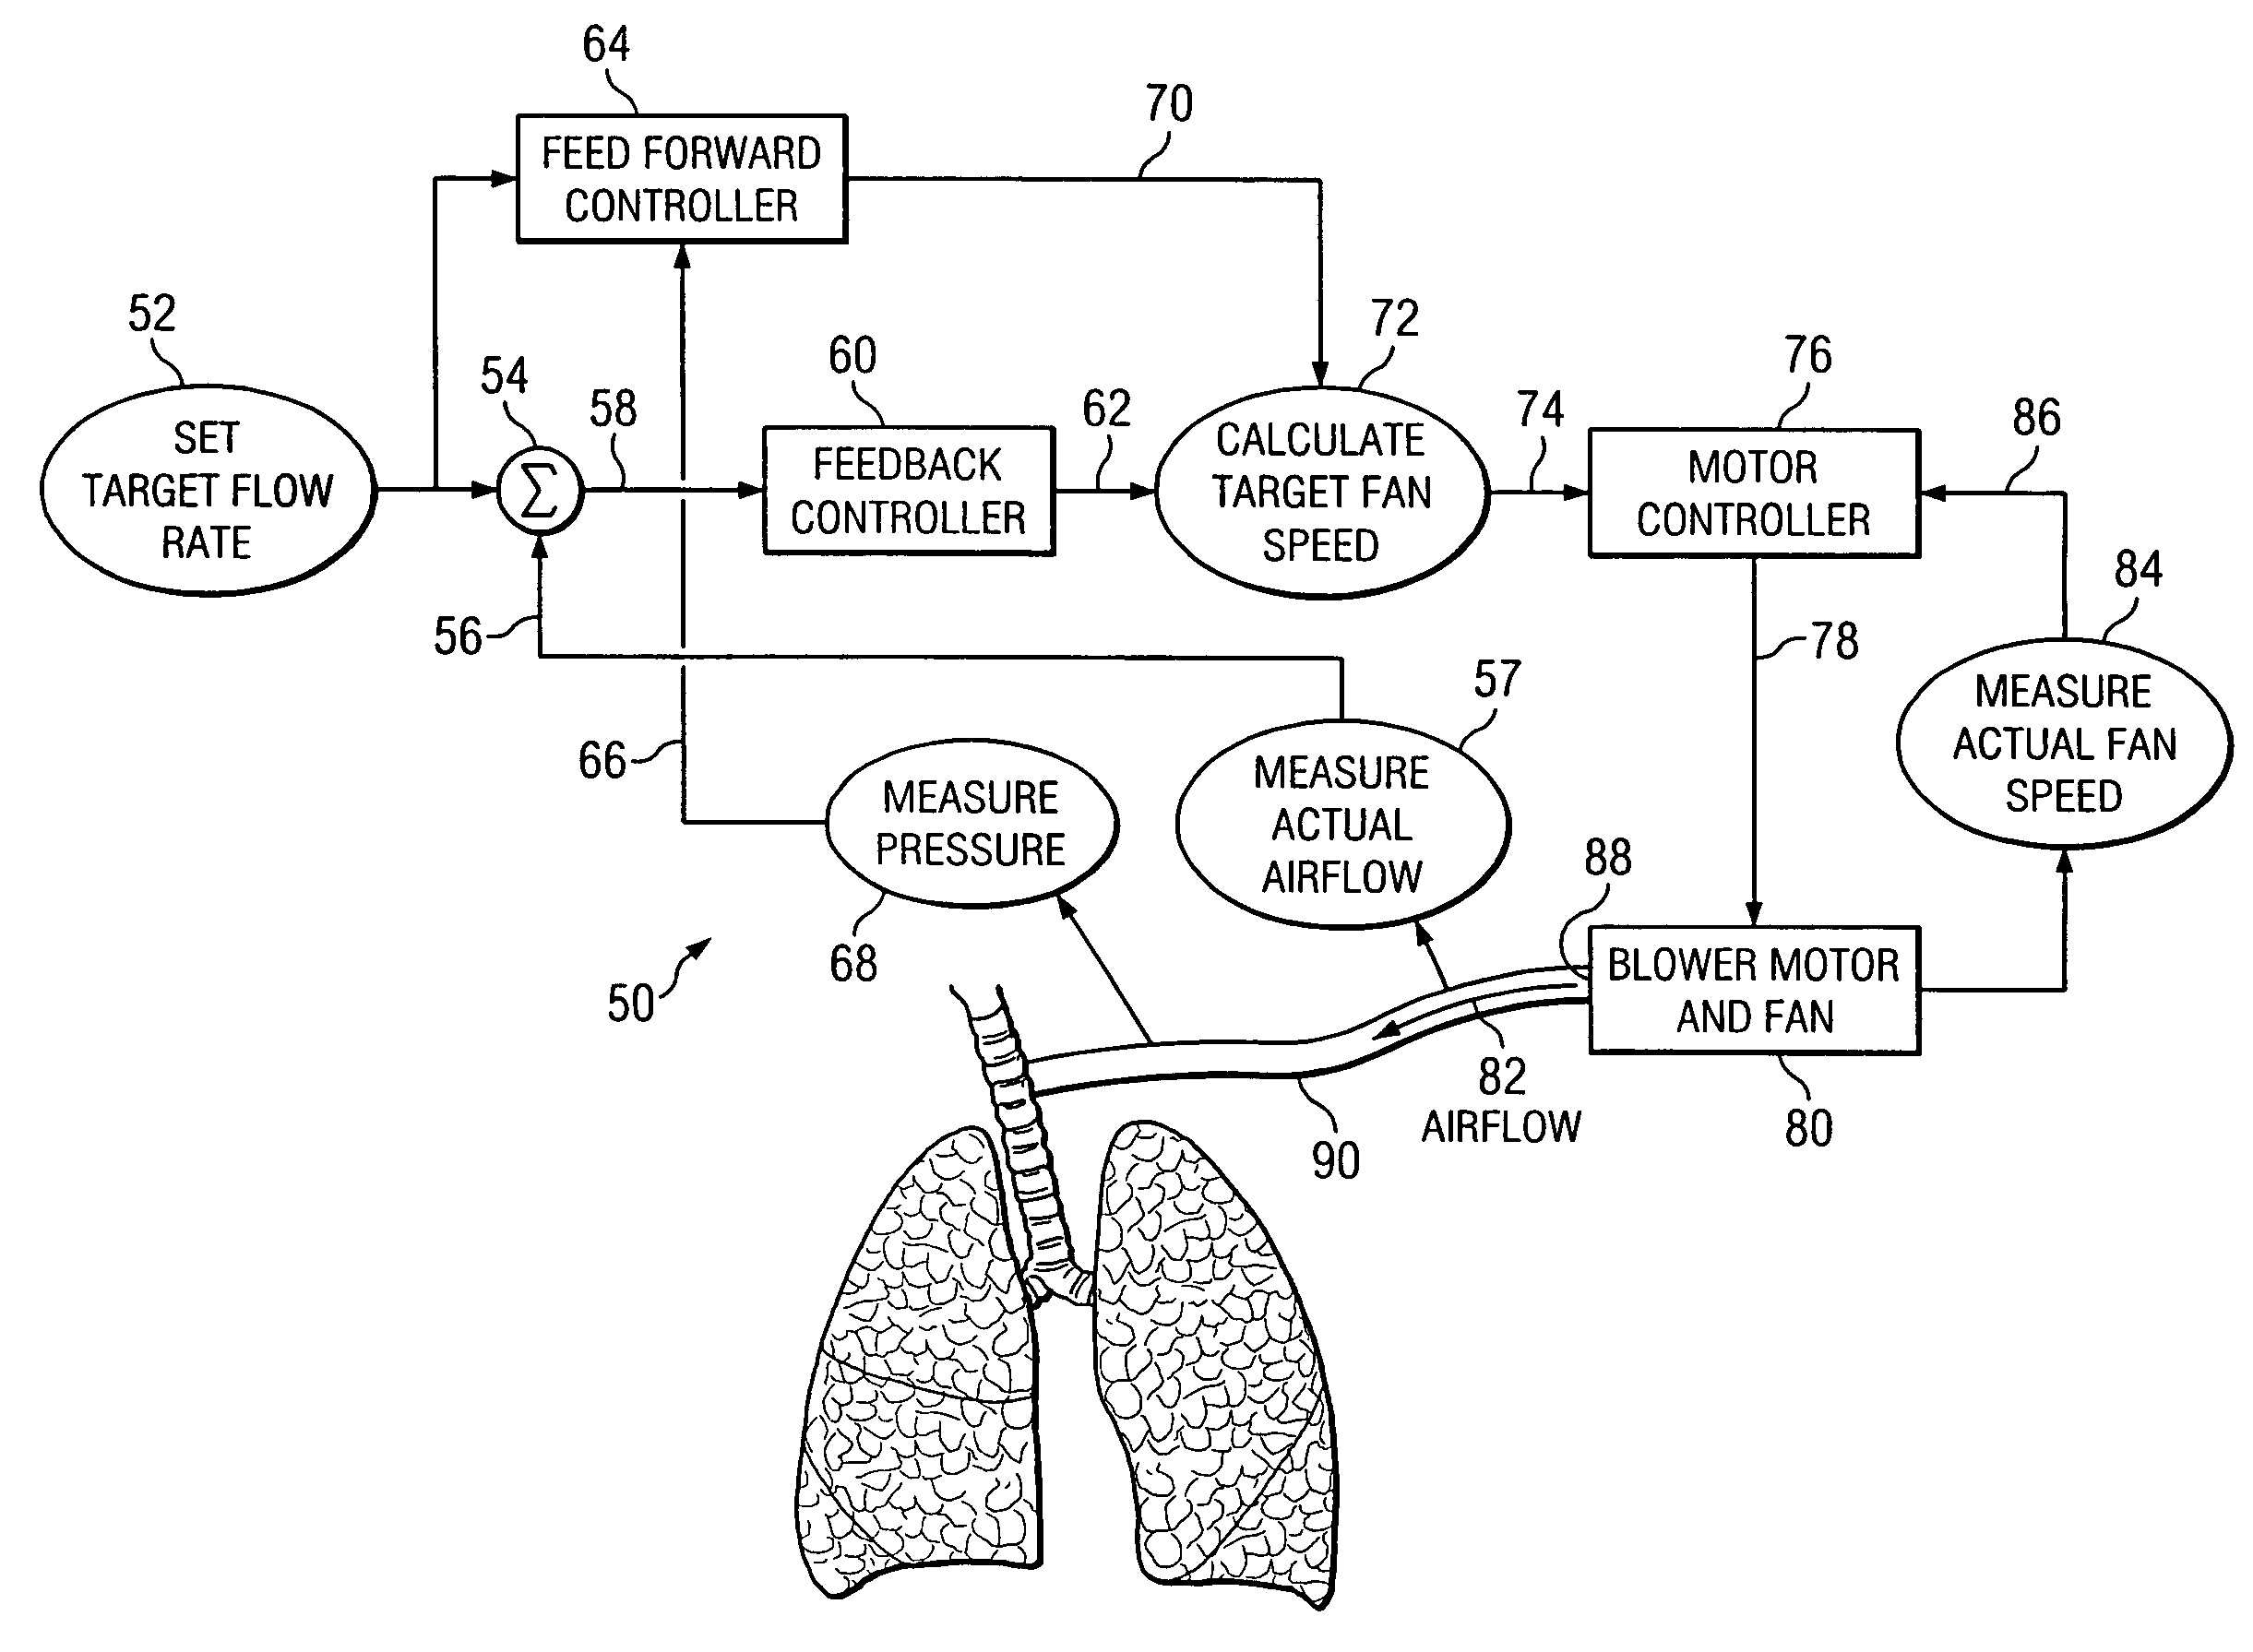 Gas flow control method in a blower based ventilation system